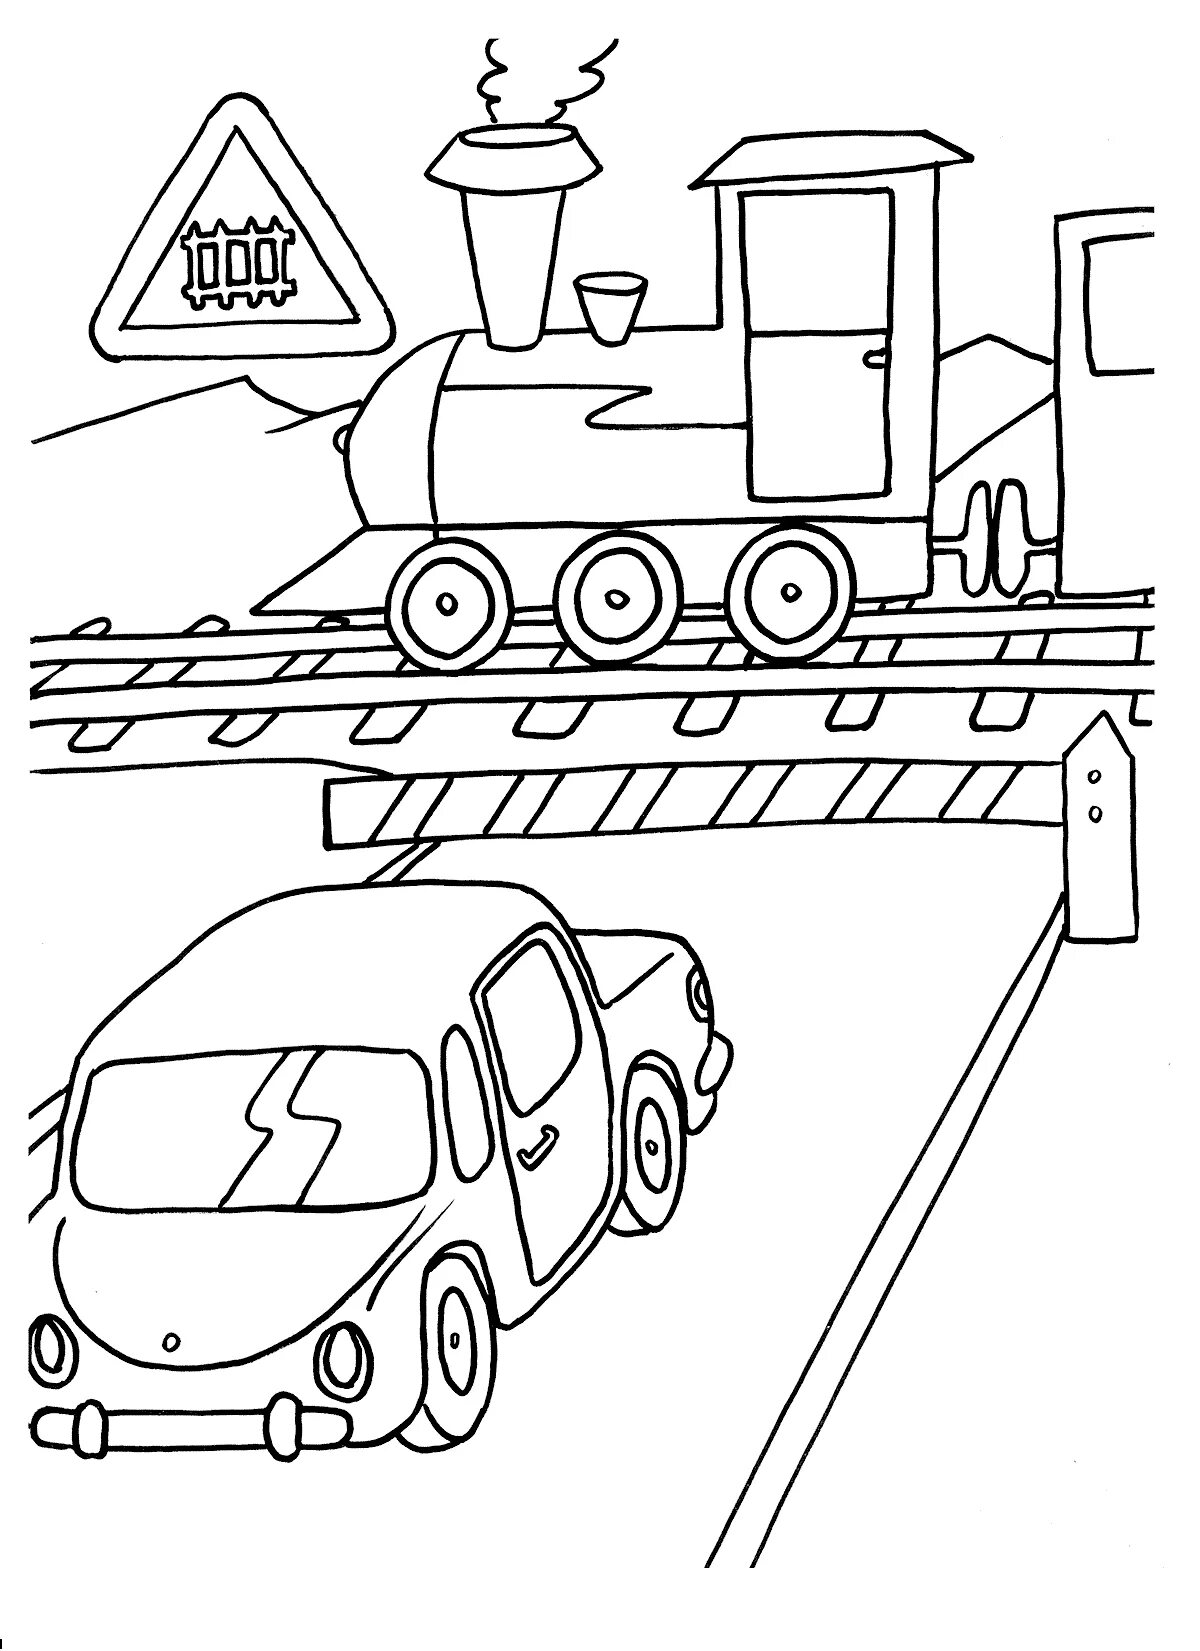 Intelligent rail safety coloring page